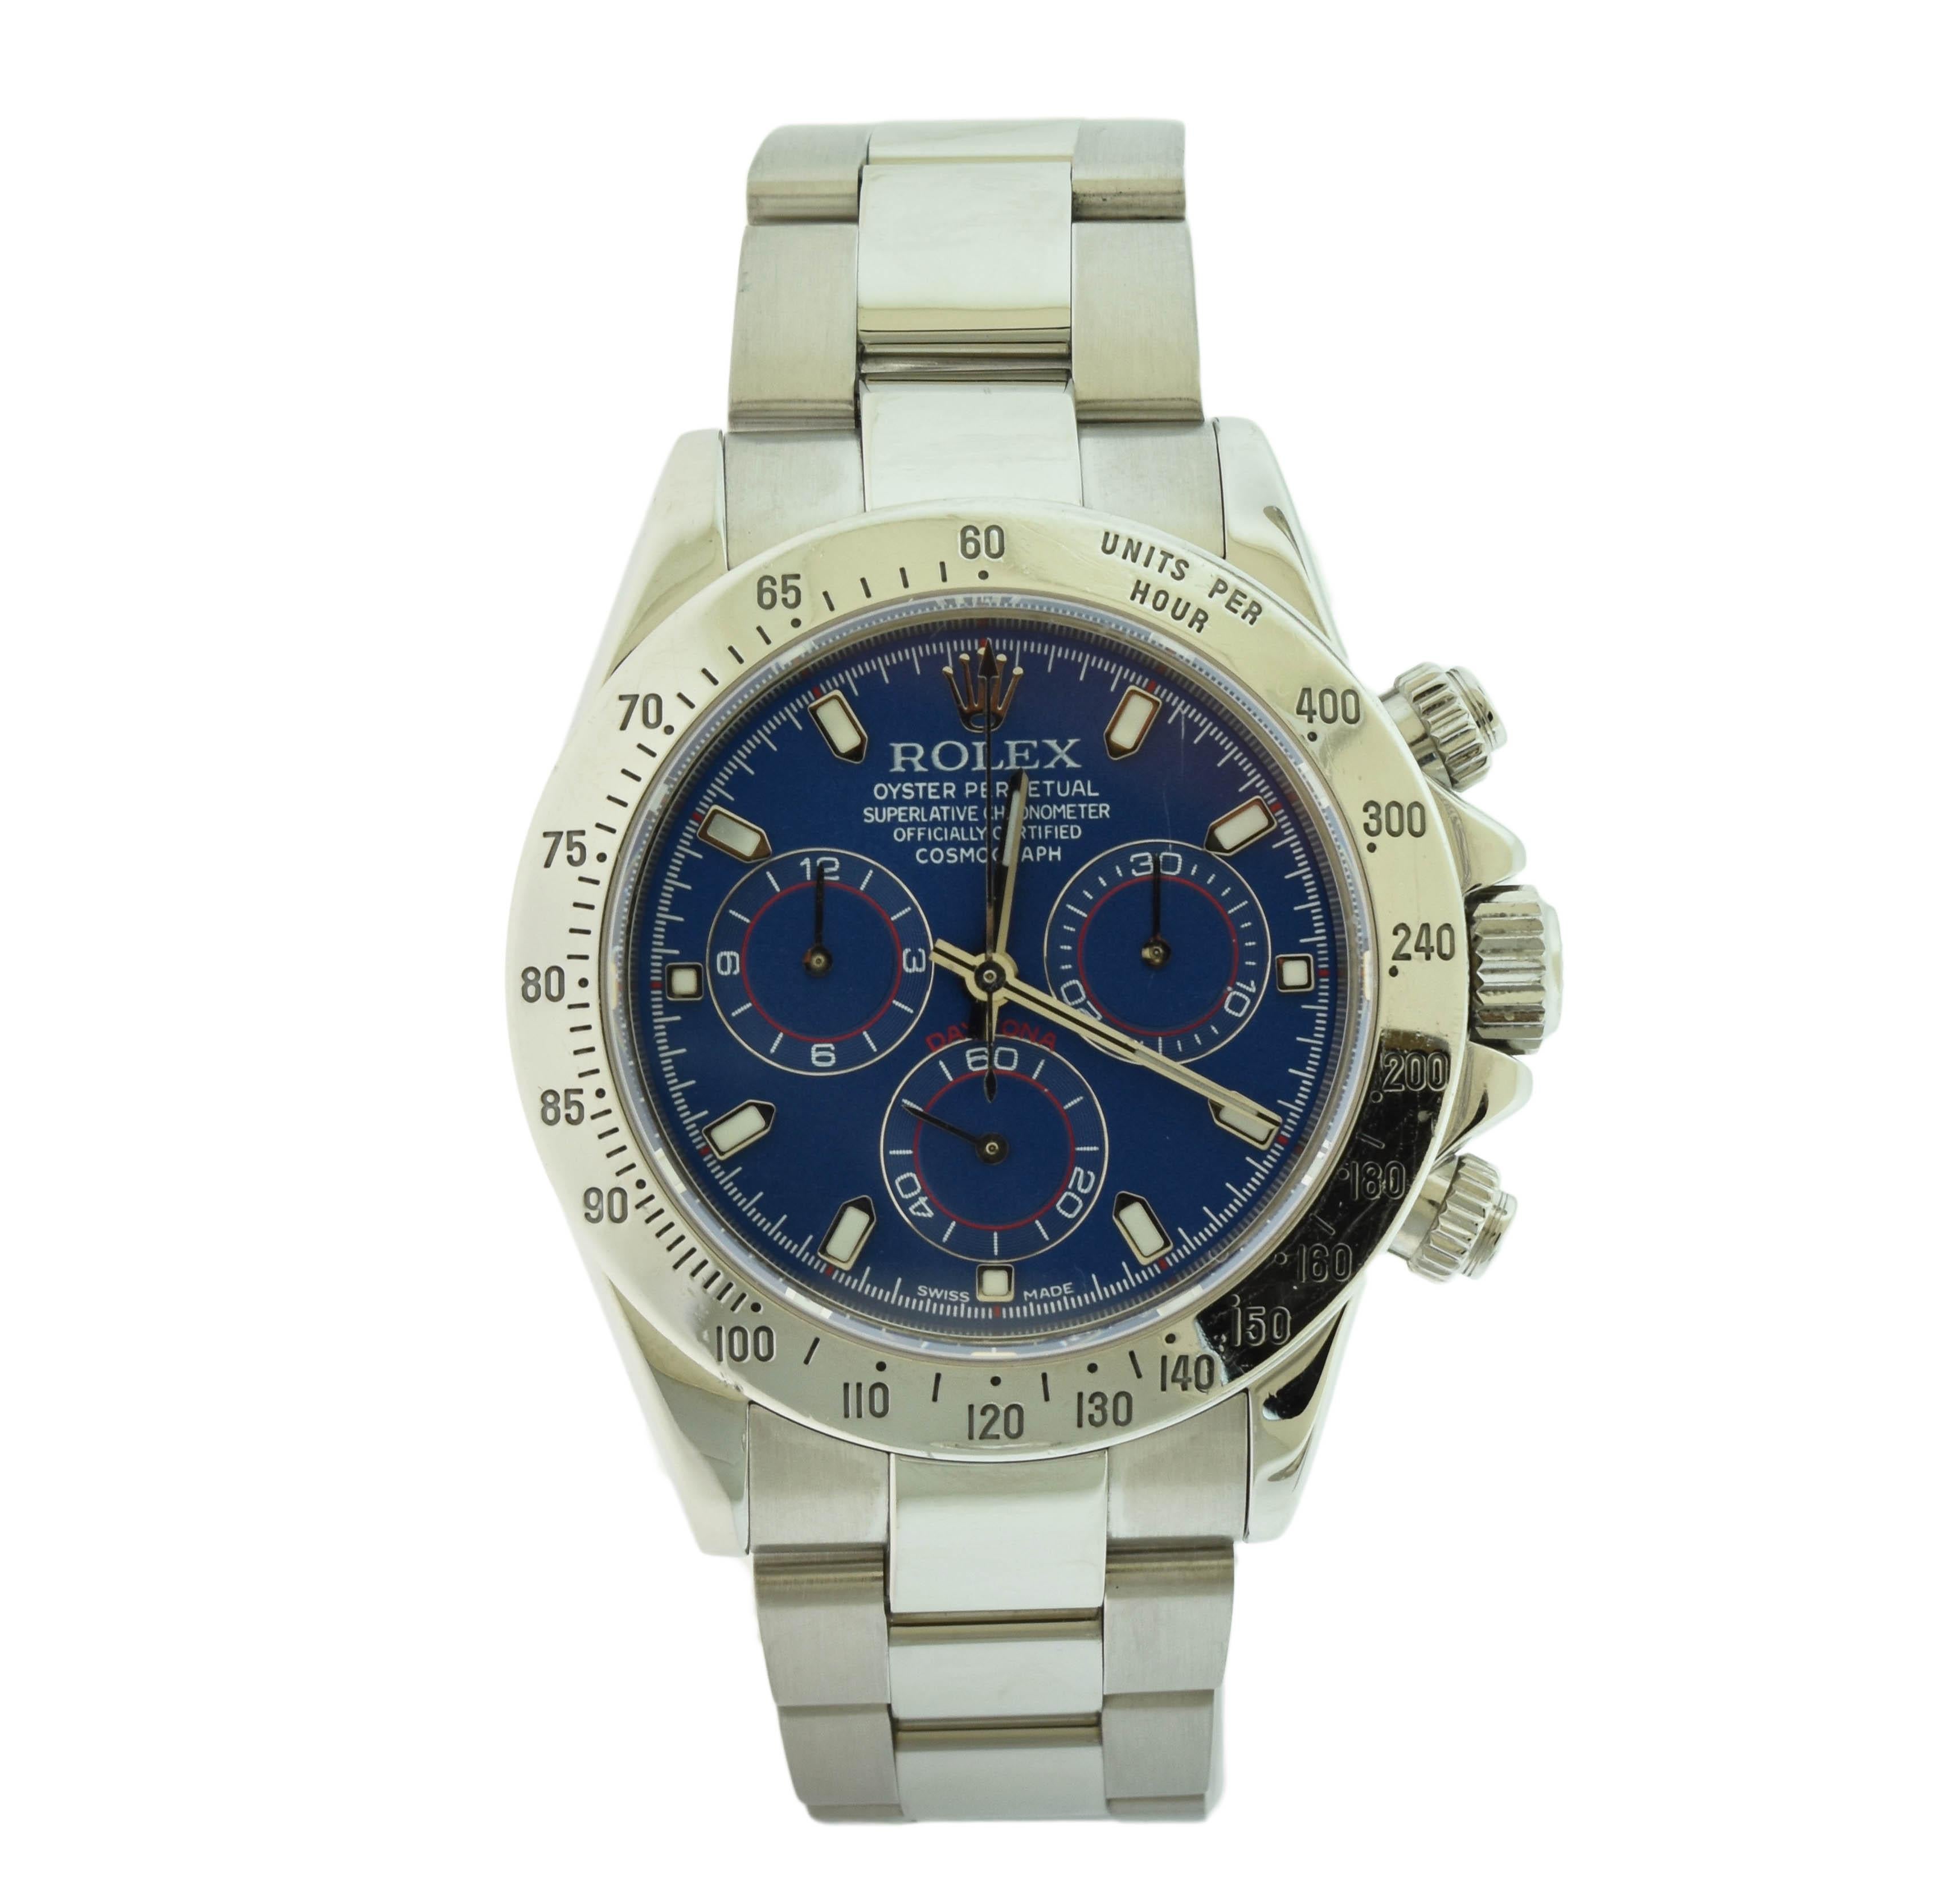 Brand: Rolex

Model Name: Daytona

Model Number: 116520

Movement: Automatic

Case Size: 40 mm

Case Material: Stainless Steel 

Dial: Blue Dial (After market)

Bezel: Engraved Tachymetric Scale

Hour Markers: Stick Hour Markers

Bracelet: Stainless